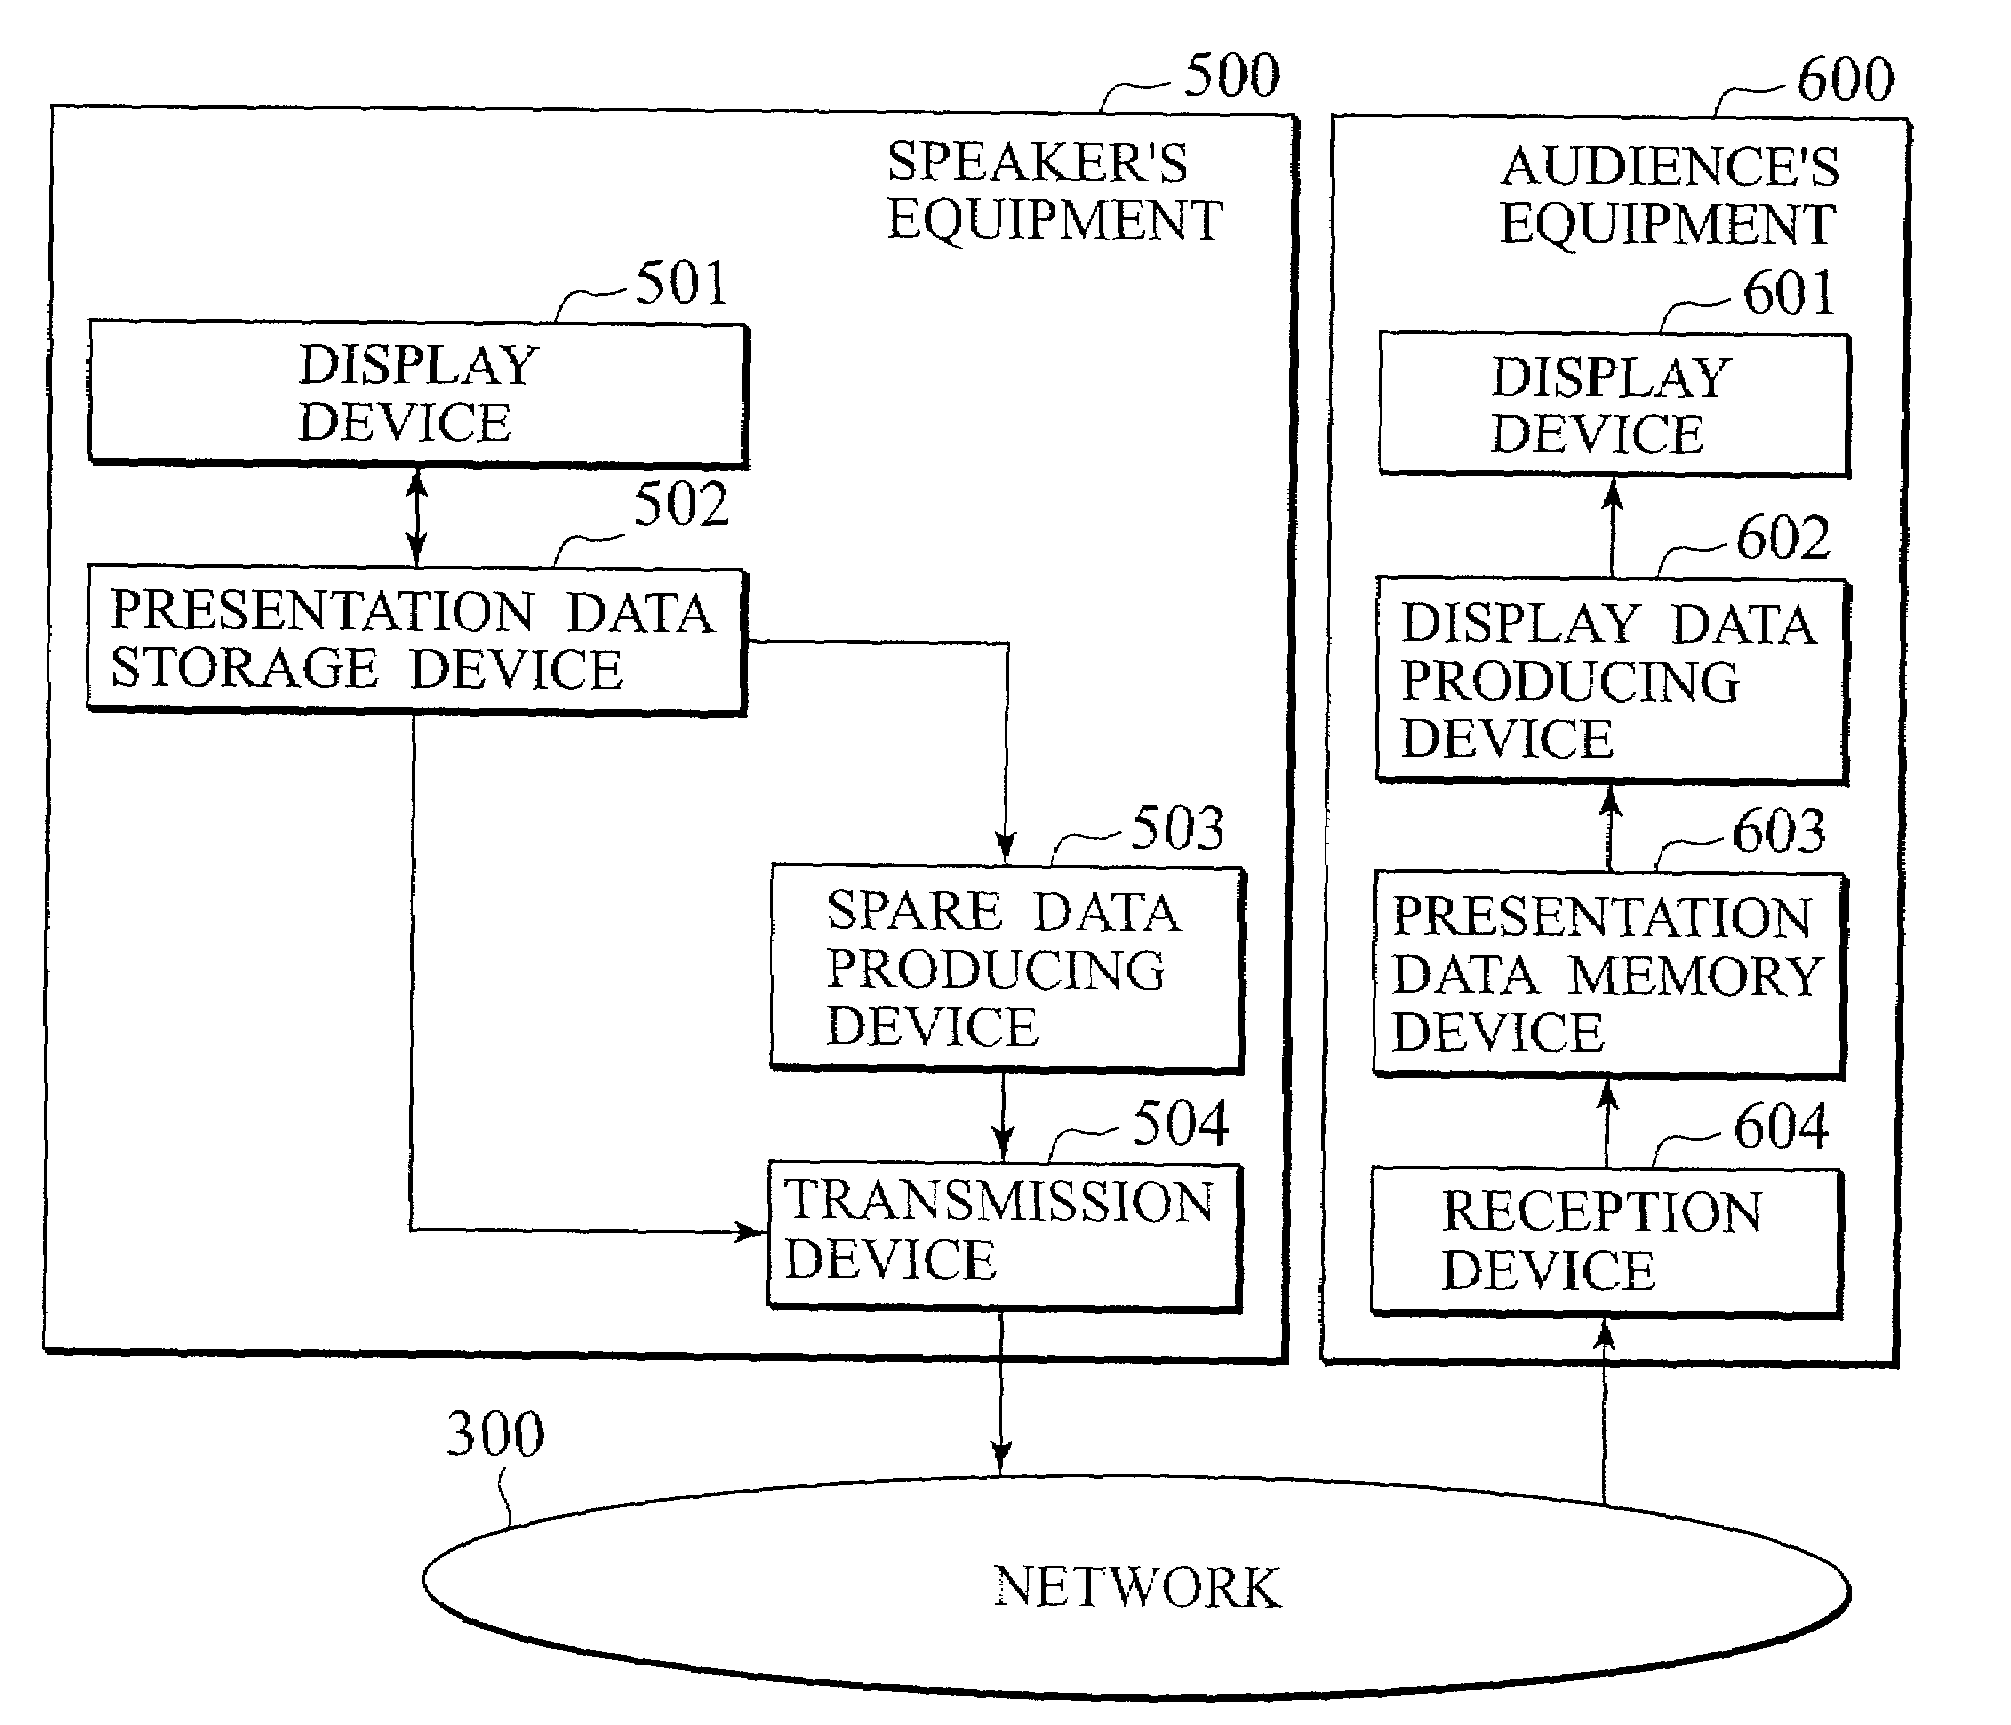 Electronic conference system using presentation data processing based on audience equipment information